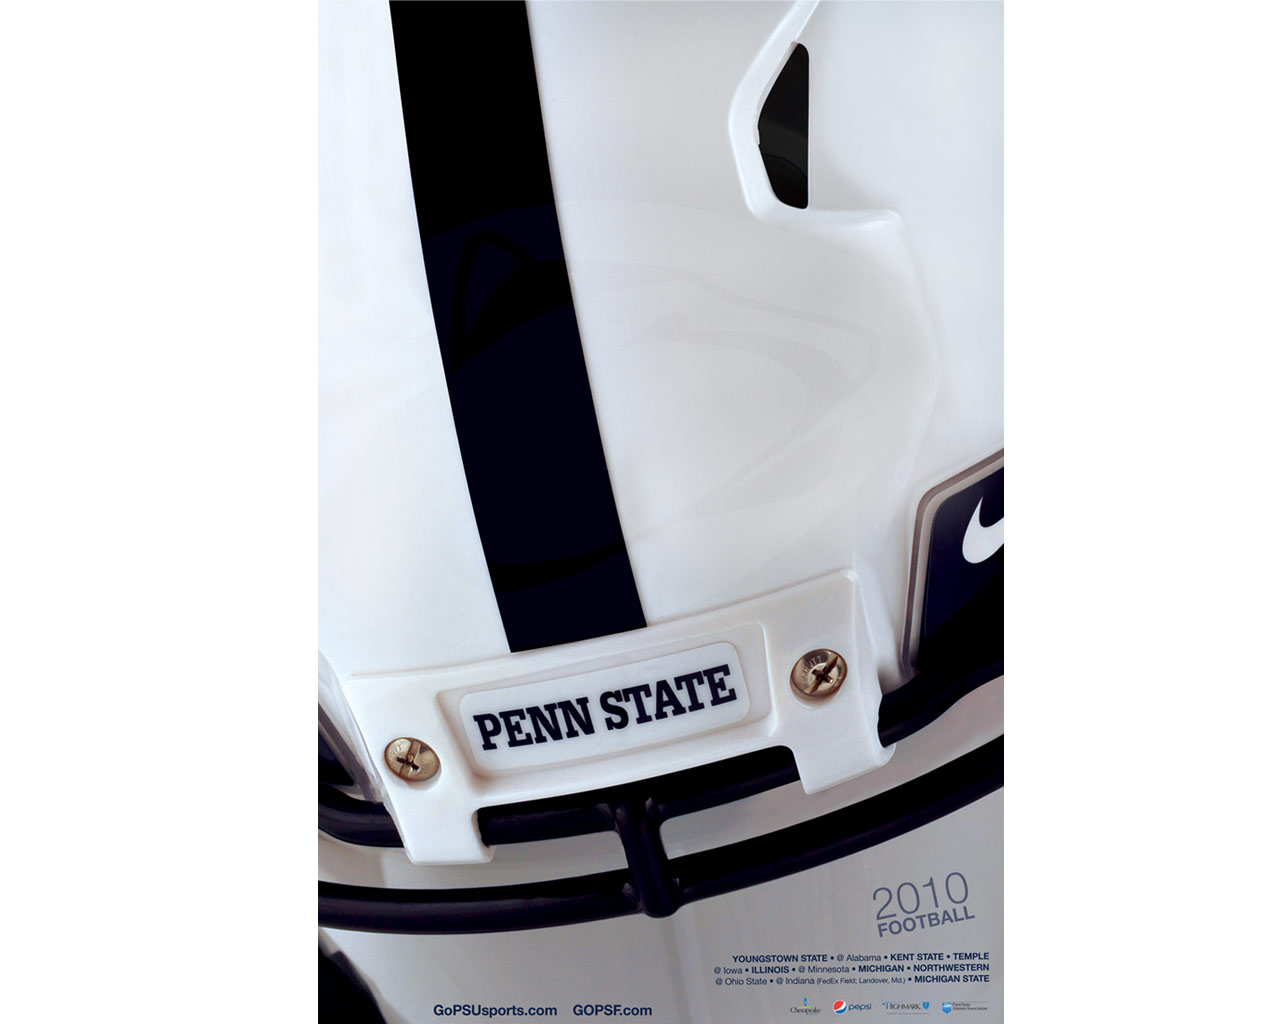 Athletics Penn State University Official Athletic Site